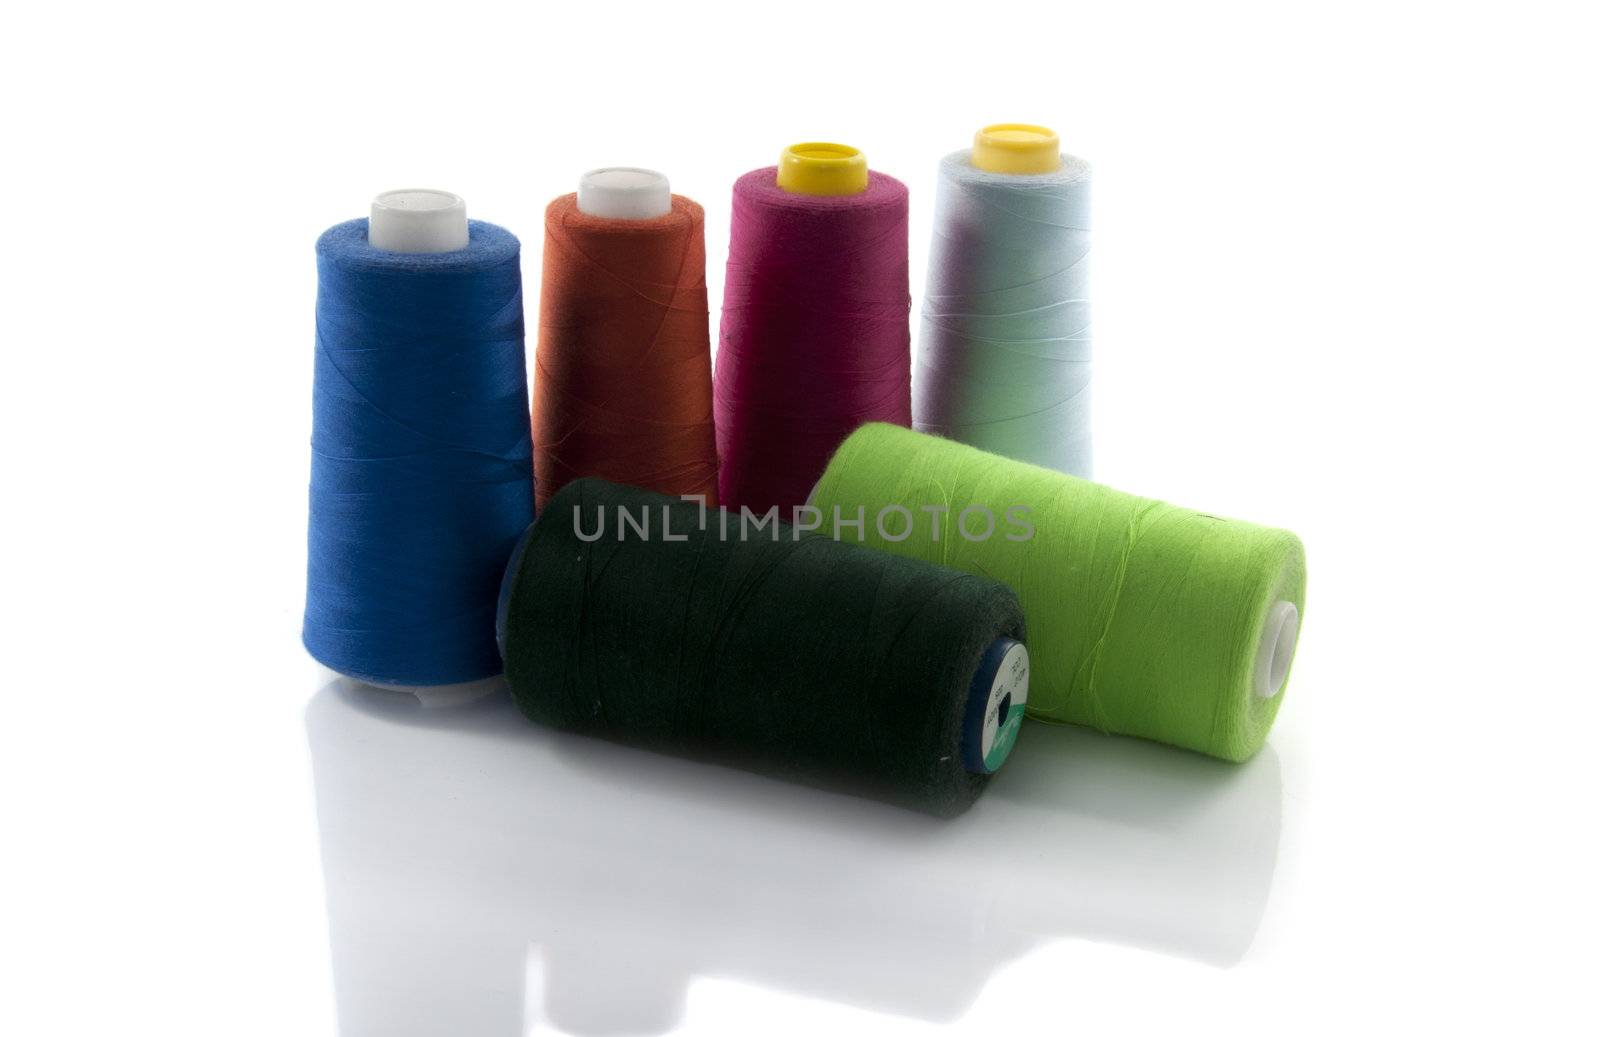 spools with cotton for manufacturing and sewing